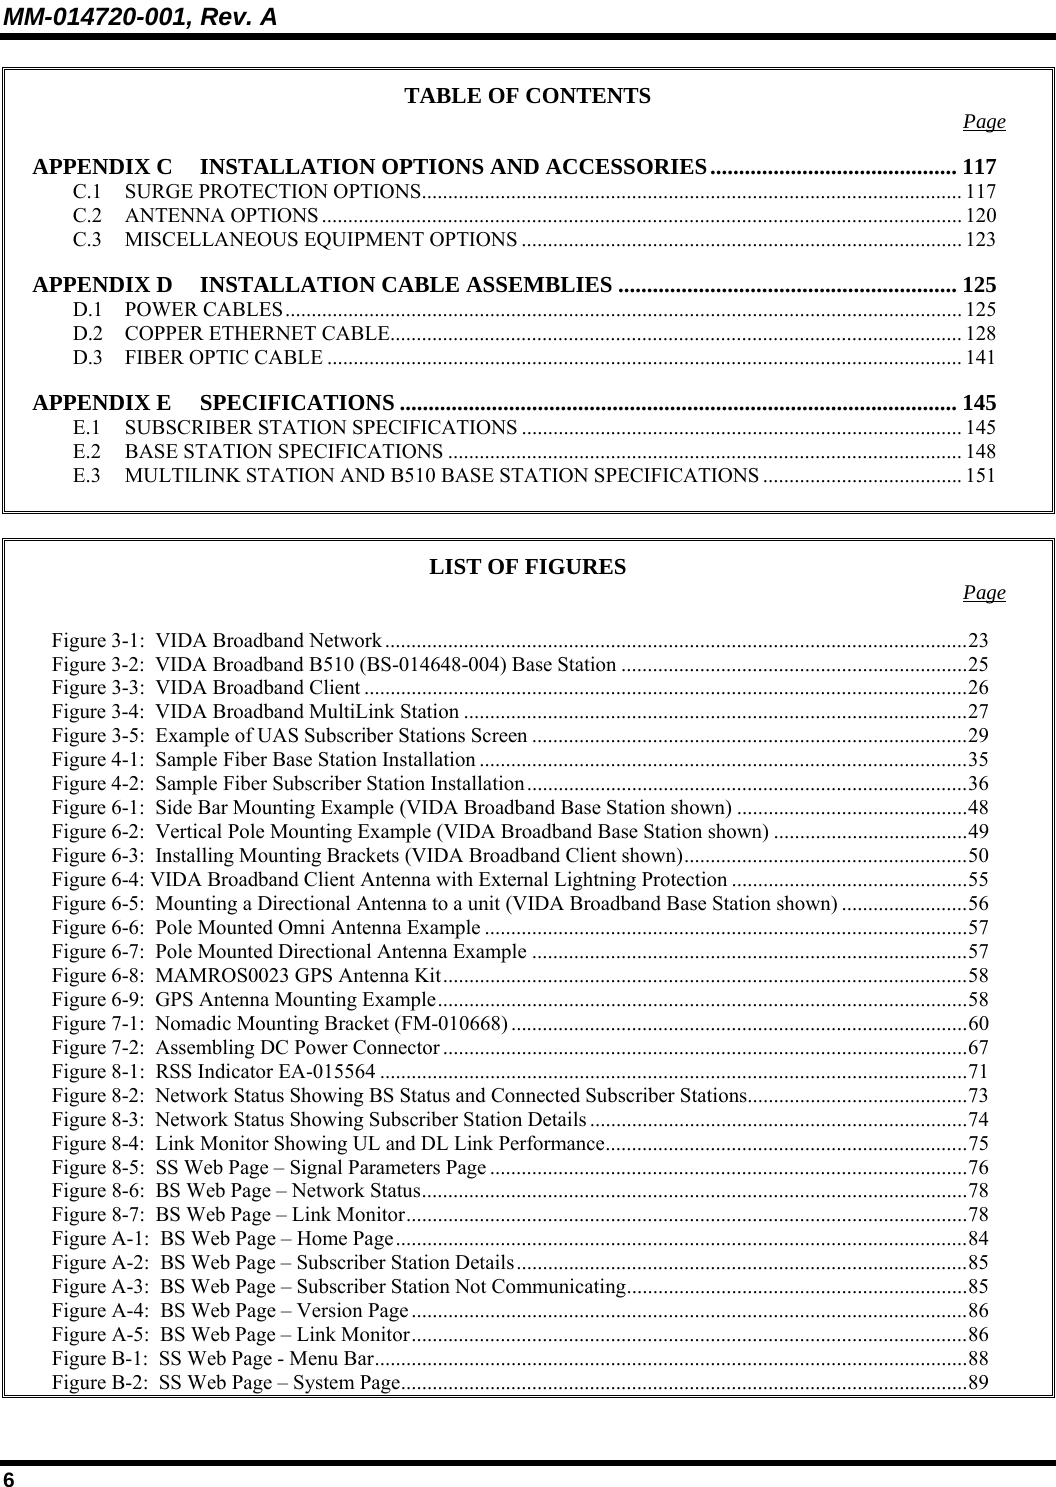 MM-014720-001, Rev. A 6 TABLE OF CONTENTS  Page APPENDIX C INSTALLATION OPTIONS AND ACCESSORIES........................................... 117 C.1 SURGE PROTECTION OPTIONS....................................................................................................... 117 C.2 ANTENNA OPTIONS .......................................................................................................................... 120 C.3 MISCELLANEOUS EQUIPMENT OPTIONS .................................................................................... 123 APPENDIX D INSTALLATION CABLE ASSEMBLIES ........................................................... 125 D.1 POWER CABLES................................................................................................................................. 125 D.2 COPPER ETHERNET CABLE............................................................................................................. 128 D.3 FIBER OPTIC CABLE ......................................................................................................................... 141 APPENDIX E SPECIFICATIONS ................................................................................................. 145 E.1 SUBSCRIBER STATION SPECIFICATIONS .................................................................................... 145 E.2 BASE STATION SPECIFICATIONS .................................................................................................. 148 E.3 MULTILINK STATION AND B510 BASE STATION SPECIFICATIONS ...................................... 151   LIST OF FIGURES  Page  Figure 3-1:  VIDA Broadband Network ...............................................................................................................23 Figure 3-2:  VIDA Broadband B510 (BS-014648-004) Base Station ..................................................................25 Figure 3-3:  VIDA Broadband Client ...................................................................................................................26 Figure 3-4:  VIDA Broadband MultiLink Station ................................................................................................27 Figure 3-5:  Example of UAS Subscriber Stations Screen ...................................................................................29 Figure 4-1:  Sample Fiber Base Station Installation .............................................................................................35 Figure 4-2:  Sample Fiber Subscriber Station Installation....................................................................................36 Figure 6-1:  Side Bar Mounting Example (VIDA Broadband Base Station shown) ............................................48 Figure 6-2:  Vertical Pole Mounting Example (VIDA Broadband Base Station shown) .....................................49 Figure 6-3:  Installing Mounting Brackets (VIDA Broadband Client shown)......................................................50 Figure 6-4: VIDA Broadband Client Antenna with External Lightning Protection .............................................55 Figure 6-5:  Mounting a Directional Antenna to a unit (VIDA Broadband Base Station shown) ........................56 Figure 6-6:  Pole Mounted Omni Antenna Example ............................................................................................57 Figure 6-7:  Pole Mounted Directional Antenna Example ...................................................................................57 Figure 6-8:  MAMROS0023 GPS Antenna Kit....................................................................................................58 Figure 6-9:  GPS Antenna Mounting Example.....................................................................................................58 Figure 7-1:  Nomadic Mounting Bracket (FM-010668) .......................................................................................60 Figure 7-2:  Assembling DC Power Connector ....................................................................................................67 Figure 8-1:  RSS Indicator EA-015564 ................................................................................................................71 Figure 8-2:  Network Status Showing BS Status and Connected Subscriber Stations..........................................73 Figure 8-3:  Network Status Showing Subscriber Station Details ........................................................................74 Figure 8-4:  Link Monitor Showing UL and DL Link Performance.....................................................................75 Figure 8-5:  SS Web Page – Signal Parameters Page ...........................................................................................76 Figure 8-6:  BS Web Page – Network Status........................................................................................................78 Figure 8-7:  BS Web Page – Link Monitor...........................................................................................................78 Figure A-1:  BS Web Page – Home Page.............................................................................................................84 Figure A-2:  BS Web Page – Subscriber Station Details......................................................................................85 Figure A-3:  BS Web Page – Subscriber Station Not Communicating.................................................................85 Figure A-4:  BS Web Page – Version Page..........................................................................................................86 Figure A-5:  BS Web Page – Link Monitor..........................................................................................................86 Figure B-1:  SS Web Page - Menu Bar.................................................................................................................88 Figure B-2:  SS Web Page – System Page............................................................................................................89 